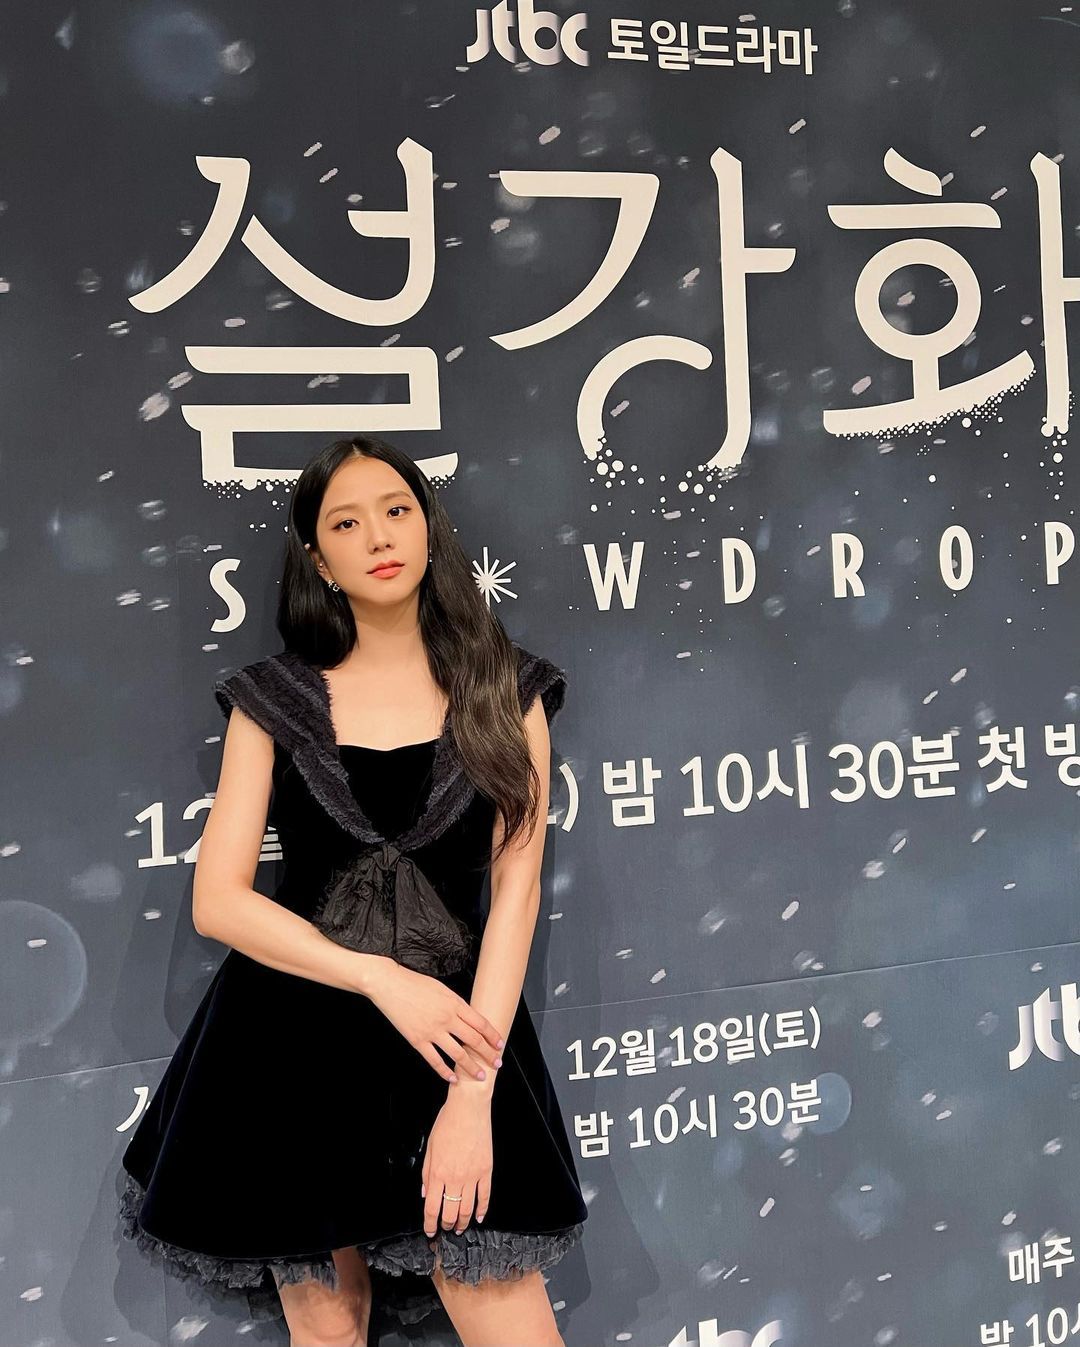 Jisoo Shows 6 Reasons Why The Little Black Dress Is A Wardrobe Essential   Gallery